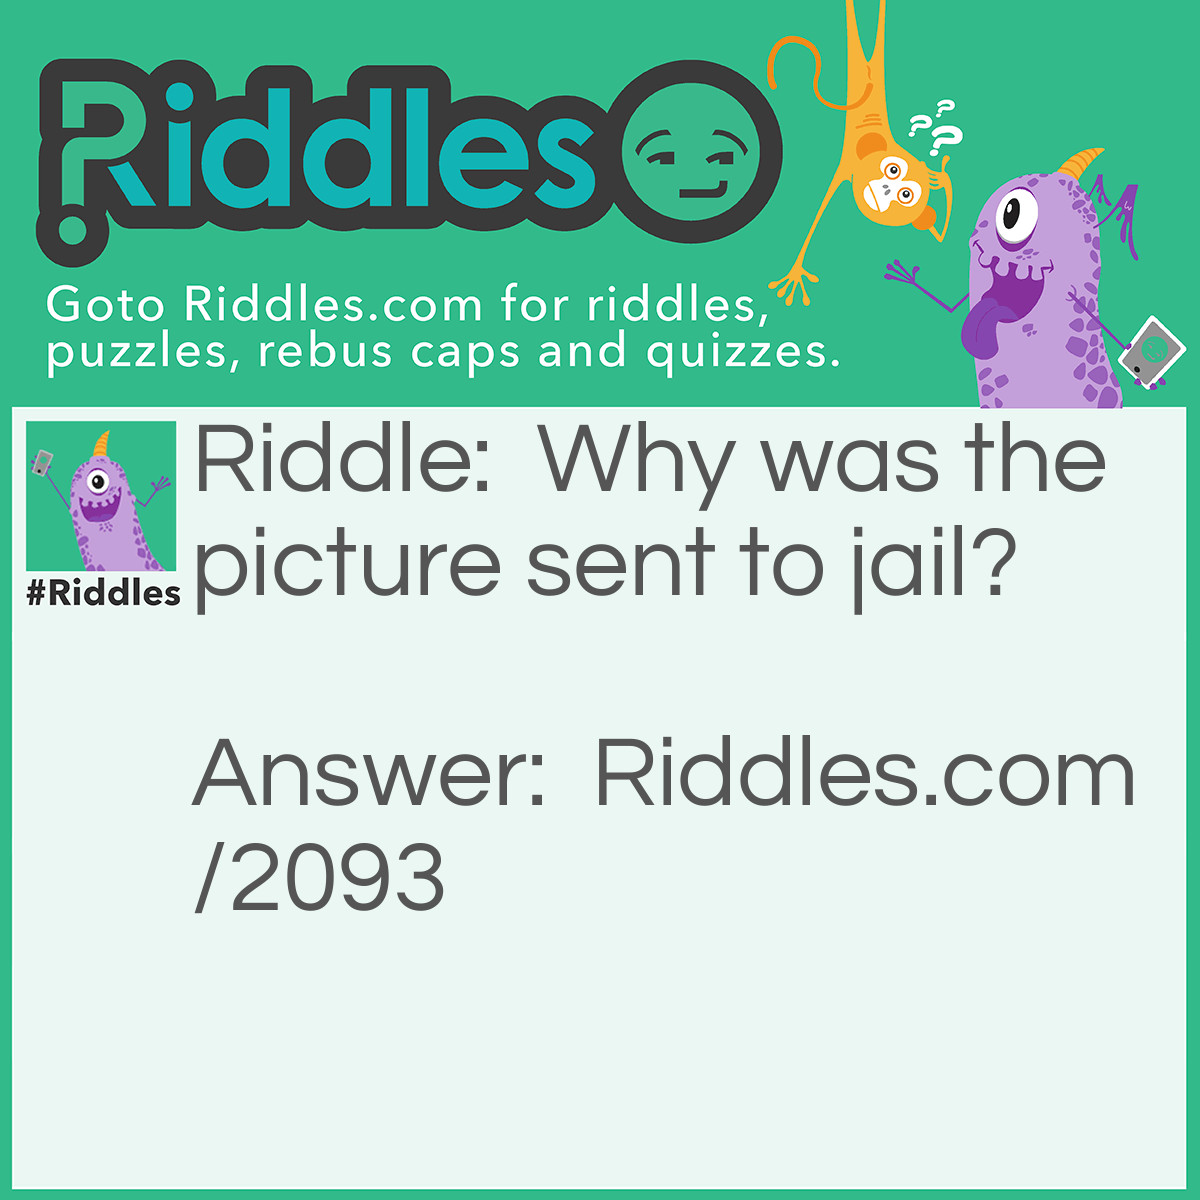 Riddle: Why was the picture sent to jail? Answer: Because it was framed.